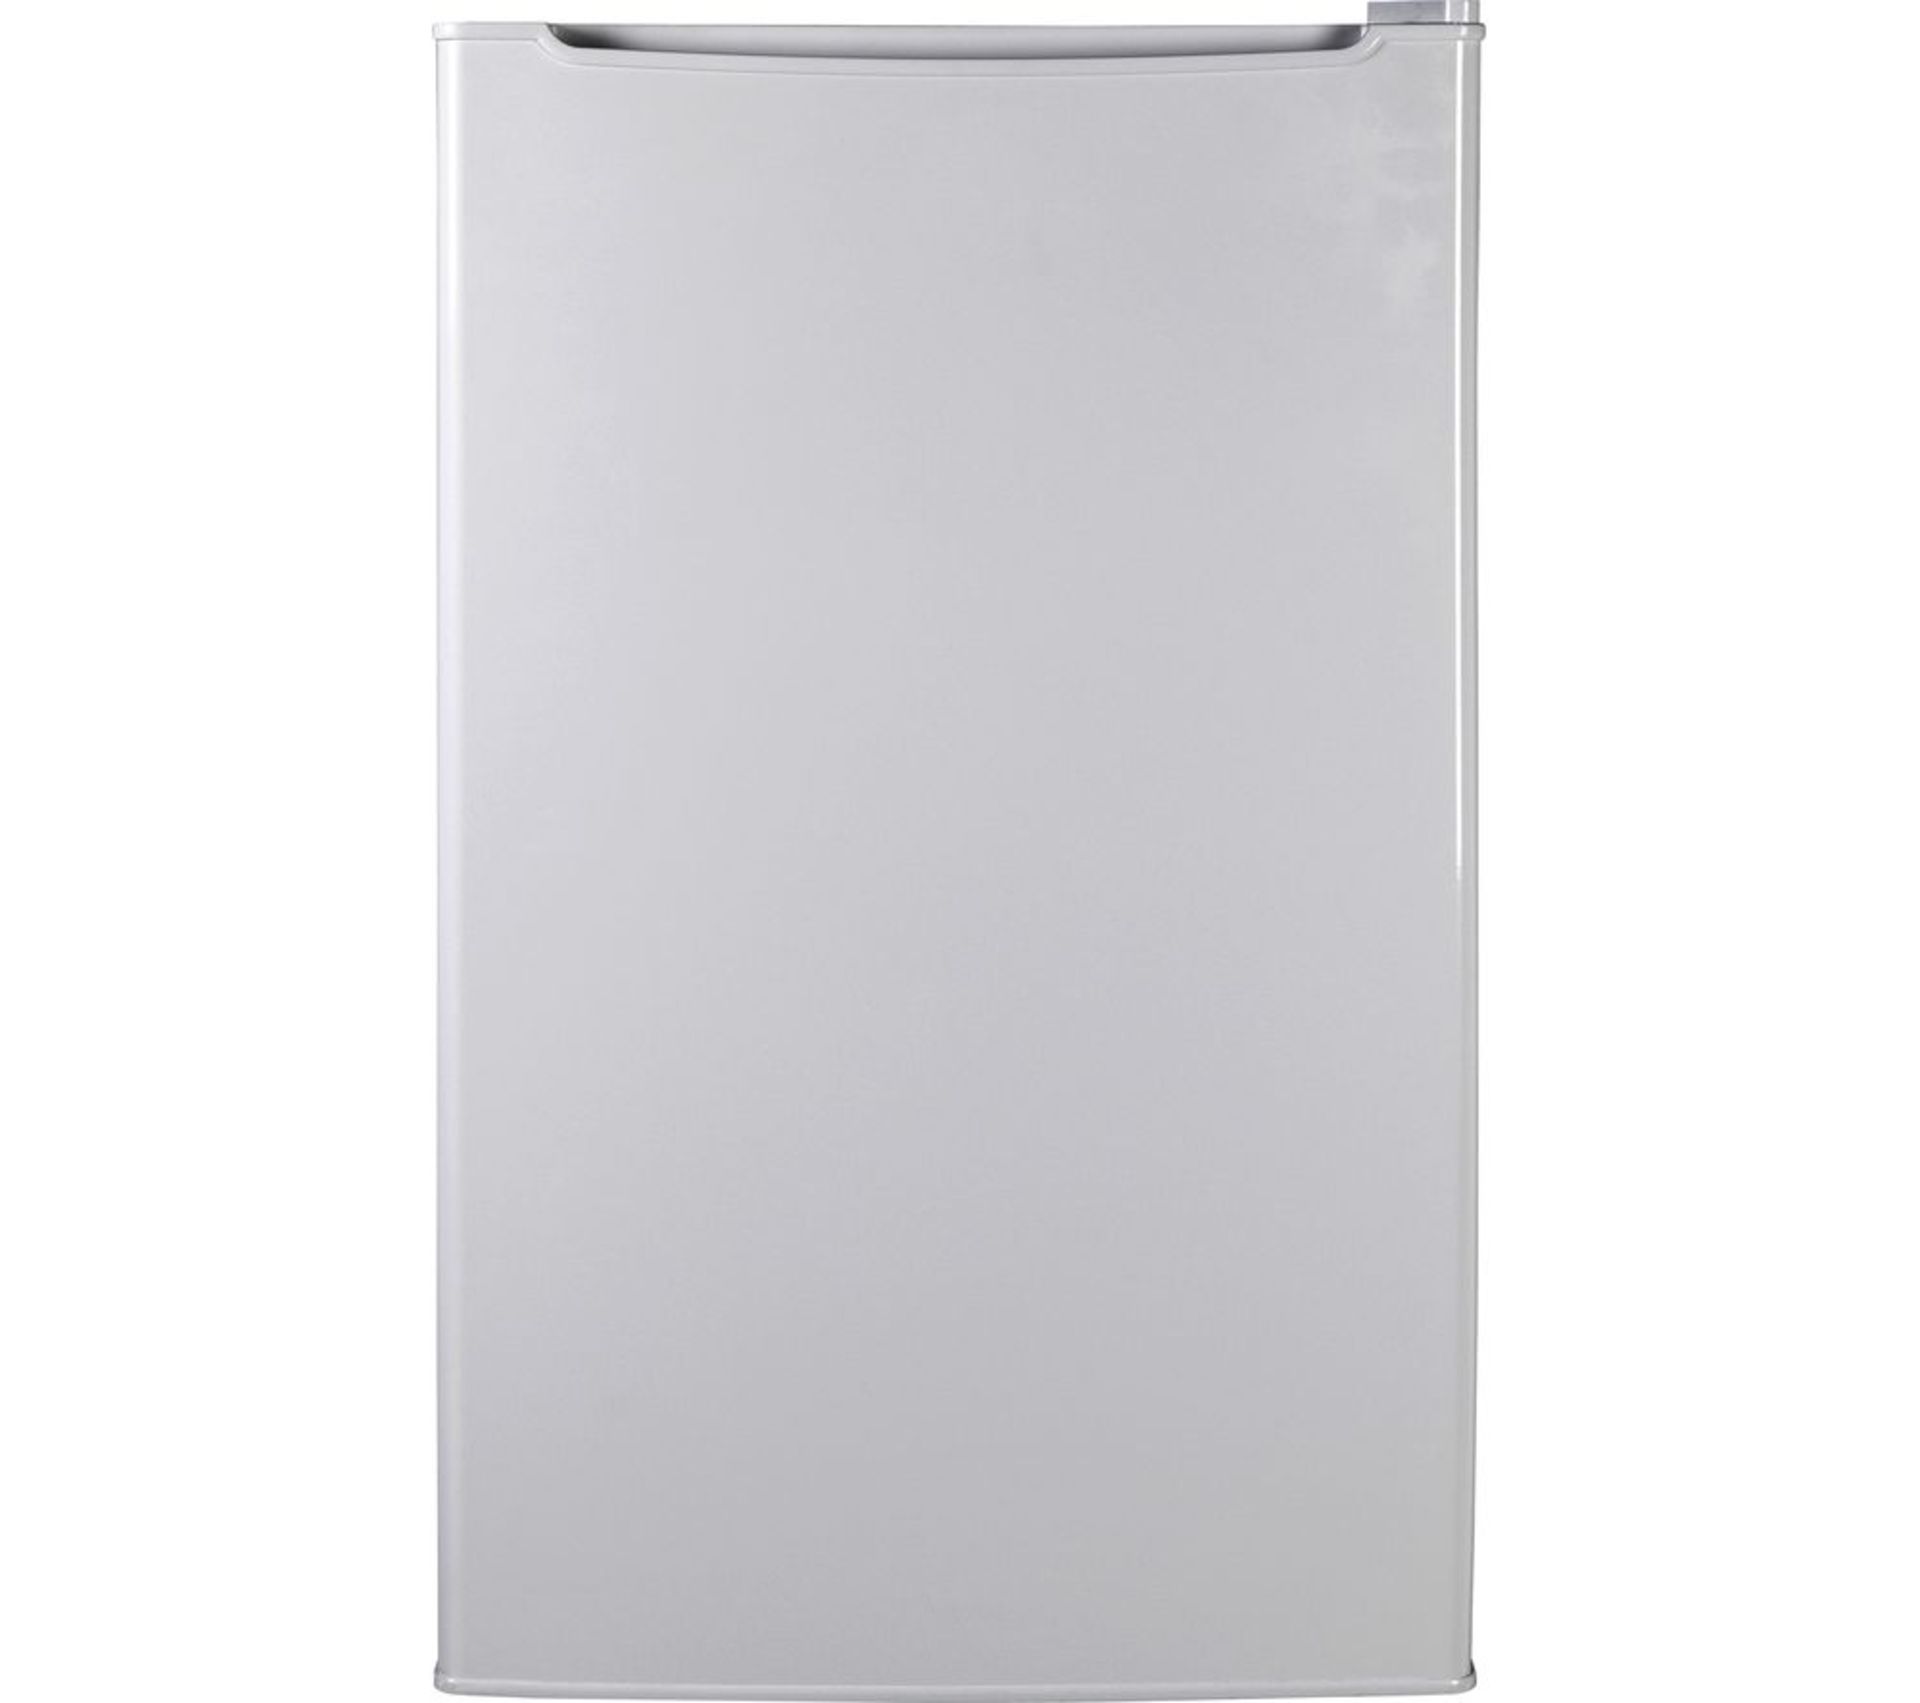 Pallet of Fridge Freezers. Brands include LOGIC. Latest selling price £509.99 - Image 3 of 4